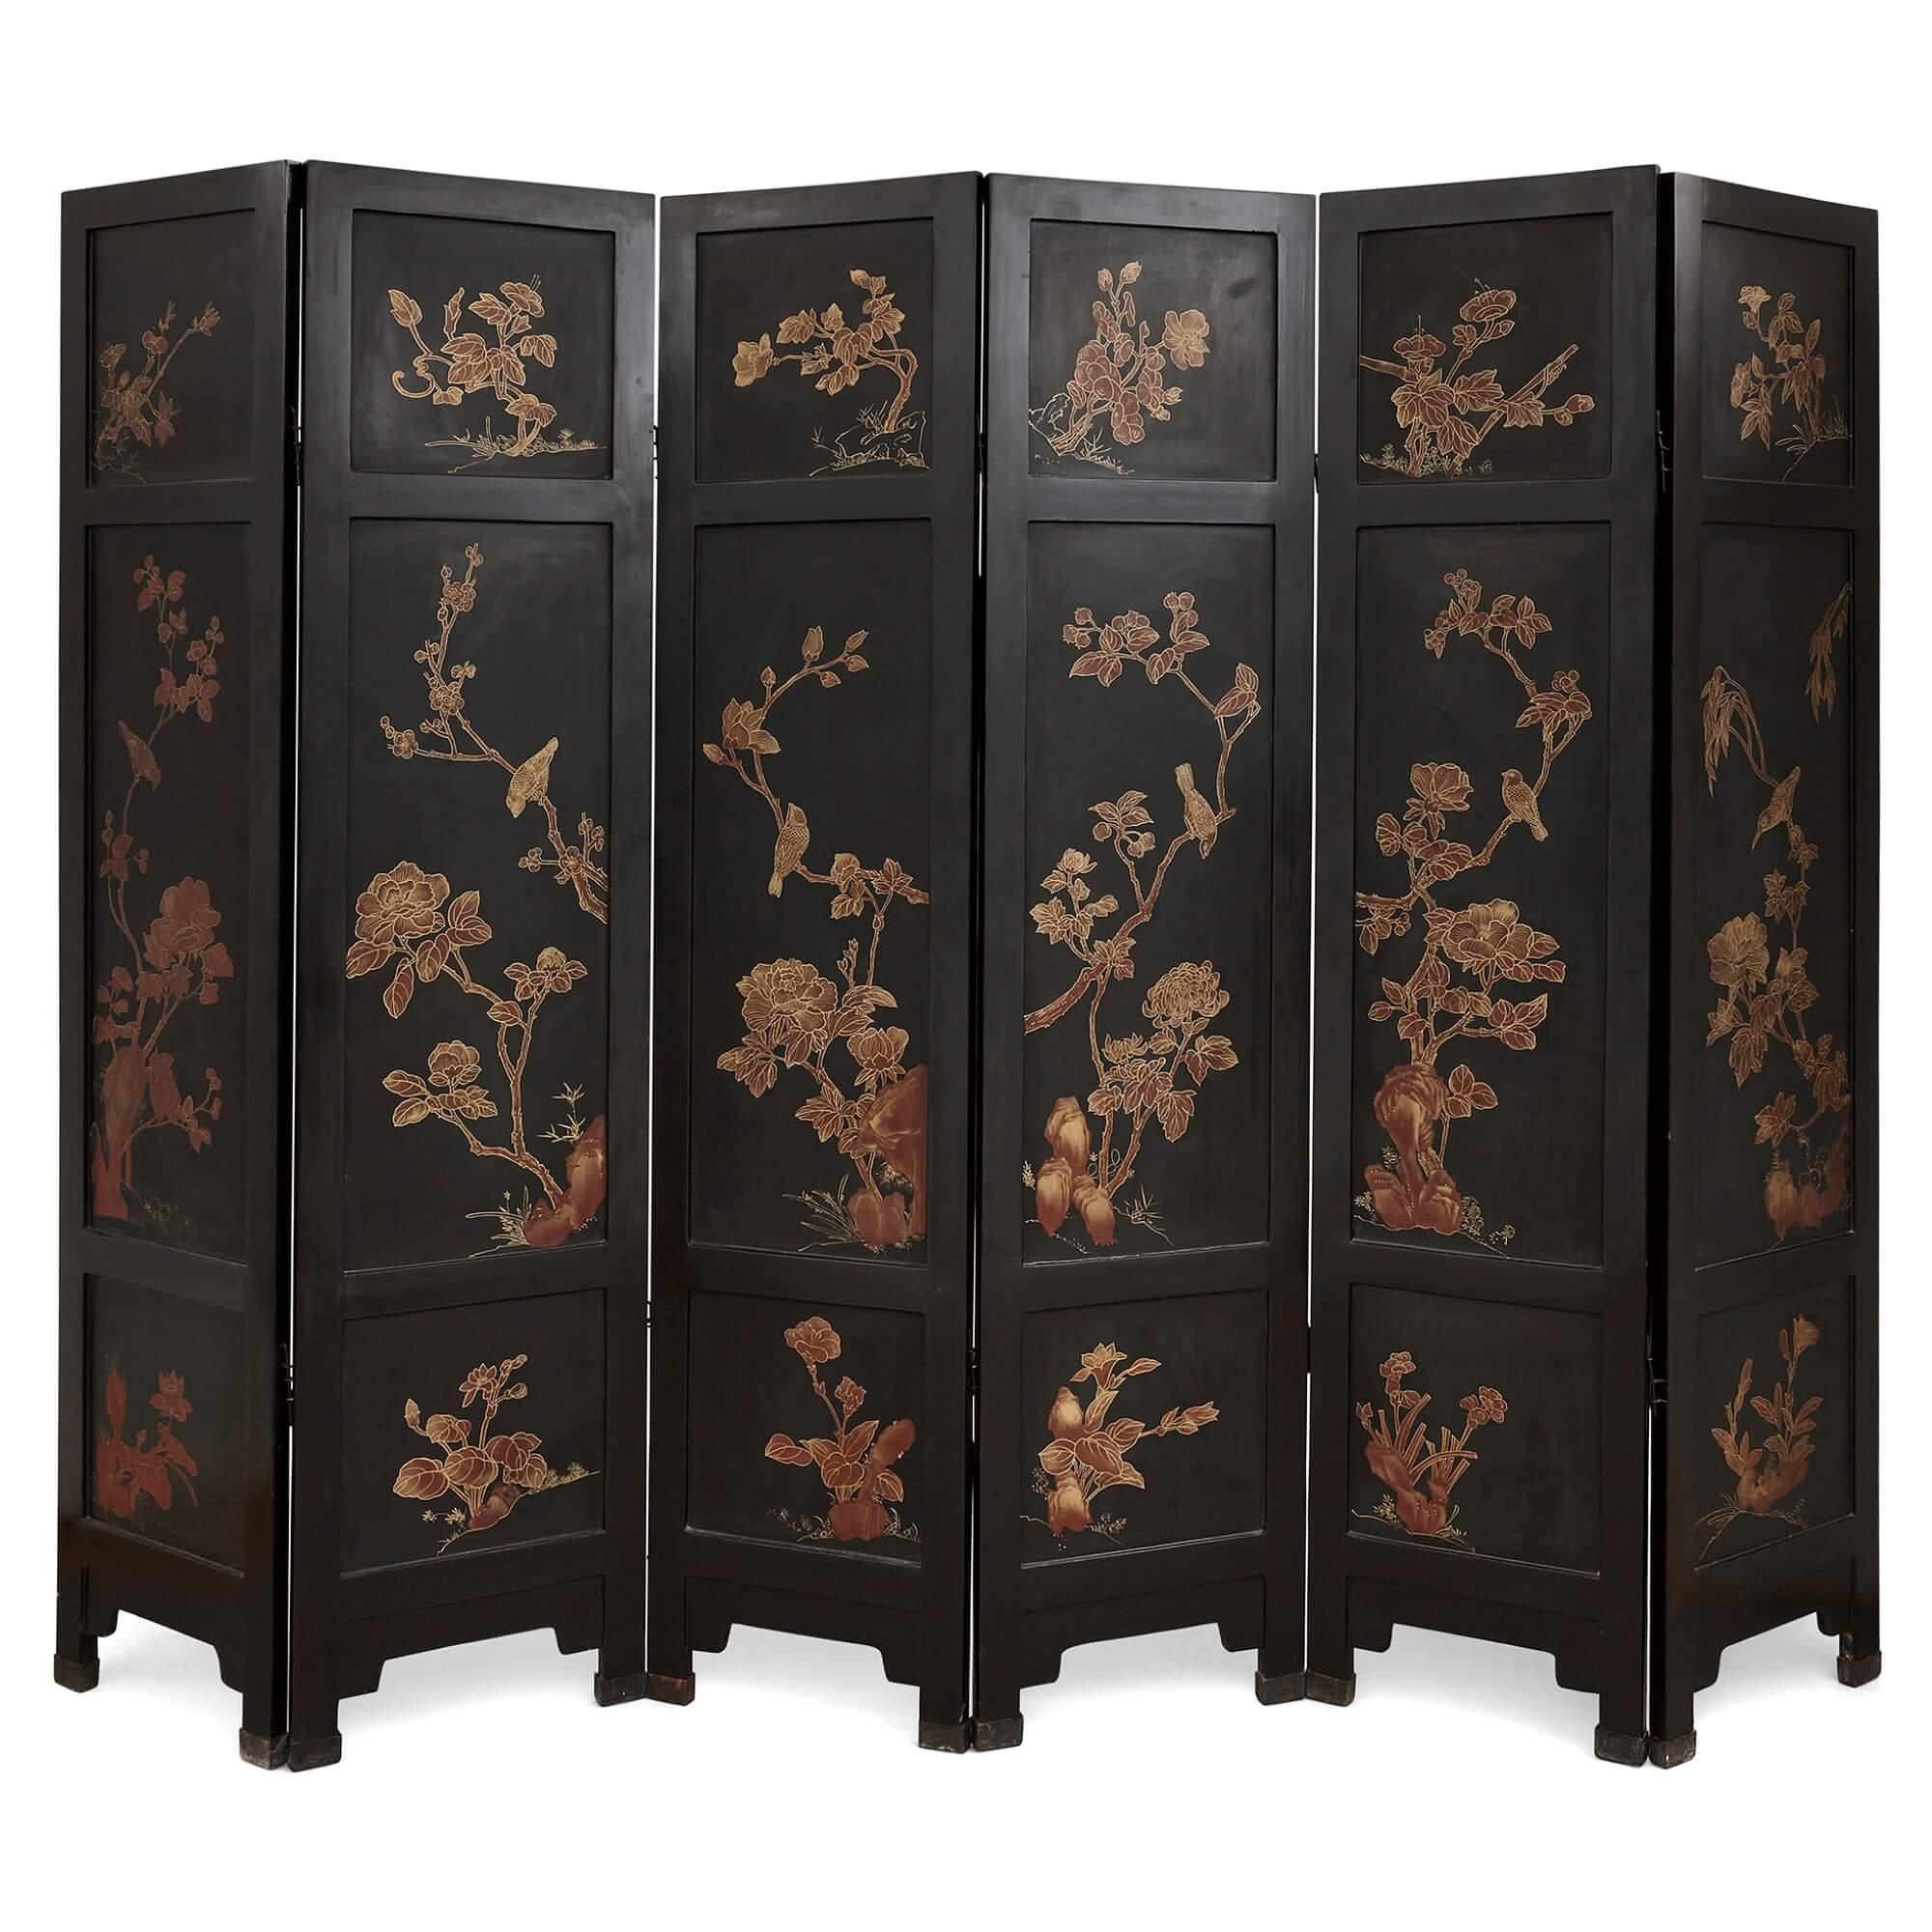 Large six-panelled Chinese hardstone and lacquered folding screen
Chinese, Early 20th Century
Closed: height 183cm, width 40.5cm, depth 18cm
Opened: height 183cm, width 243cm, depth 2.5cm

The large and intricately detailed screen is formed of six